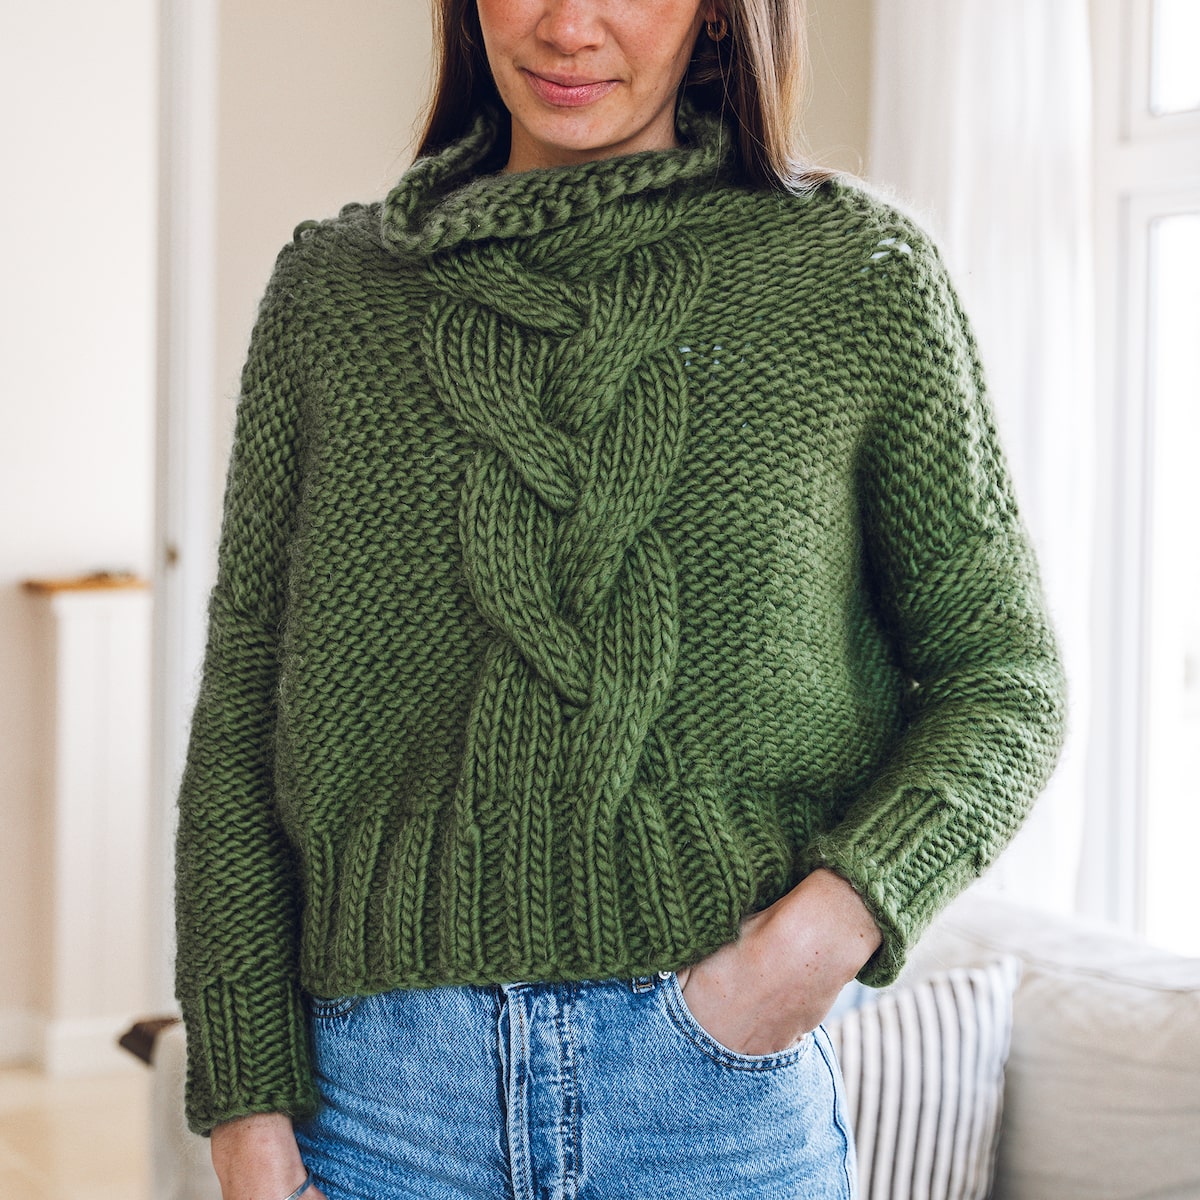 FOREST-CROPPED-CABLE-KNIT-JUMPER-SUPER-CHUNKY-YARN-LAUREN-ASTON-DESIGNS-1